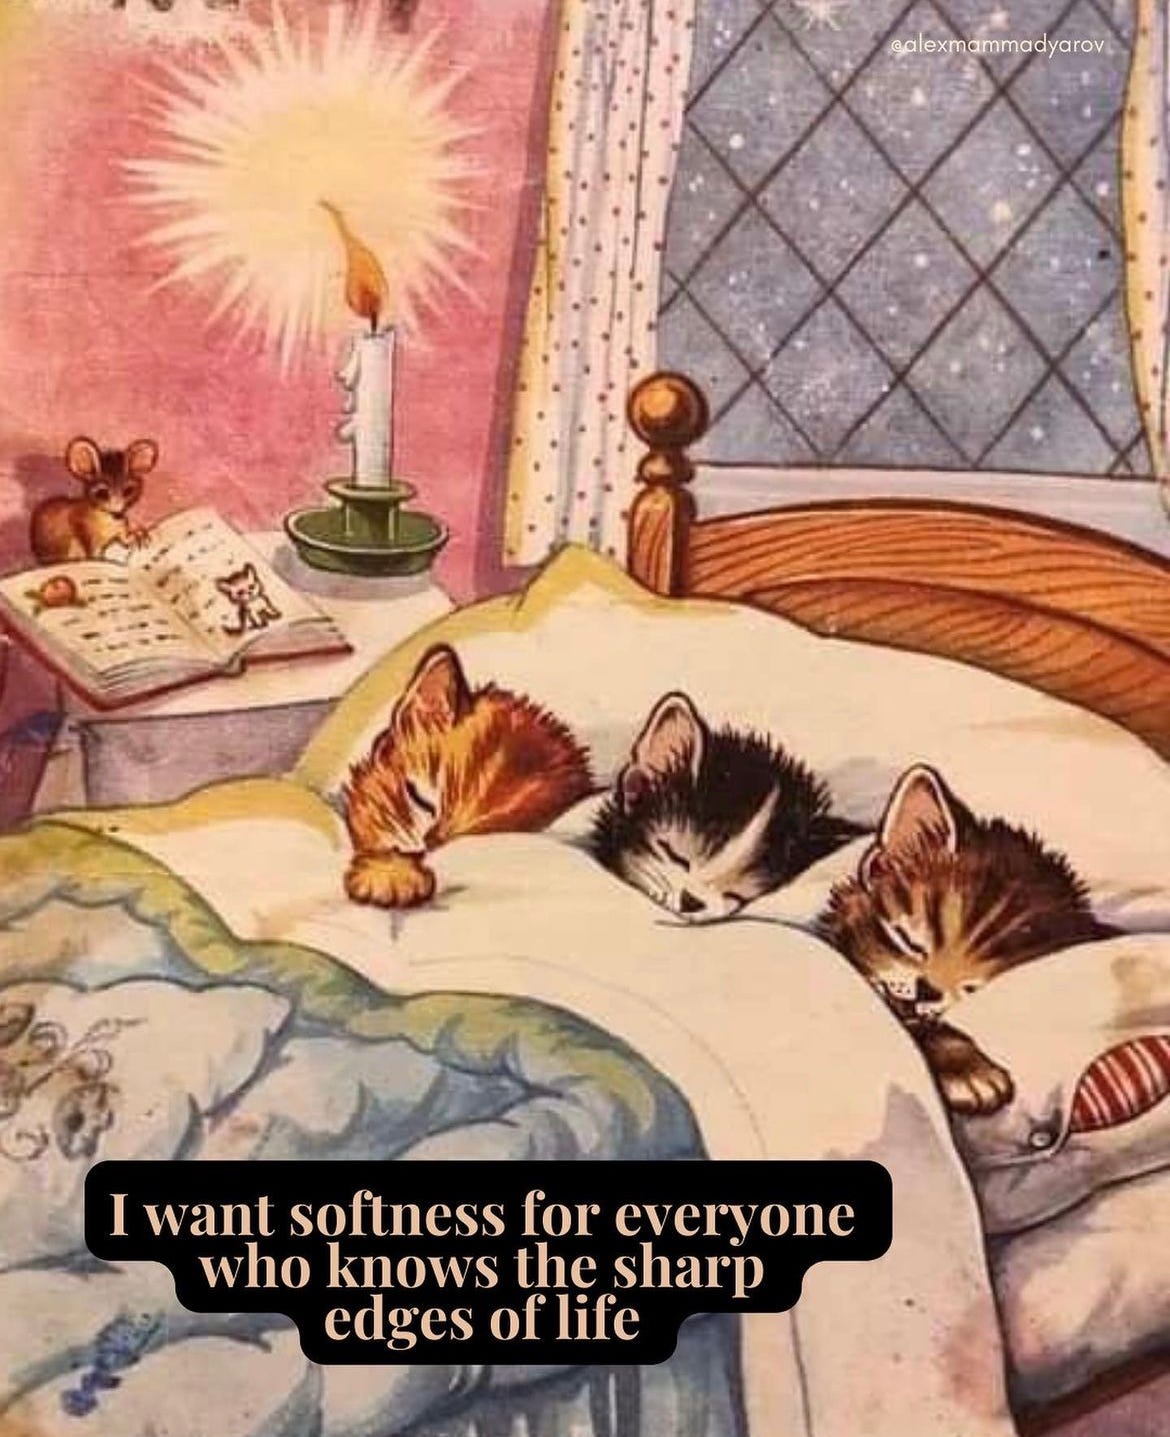 3 illustrated kittens sleeping in bed, with text that reads "i want softness for everyone who knows the sharp edges of life."